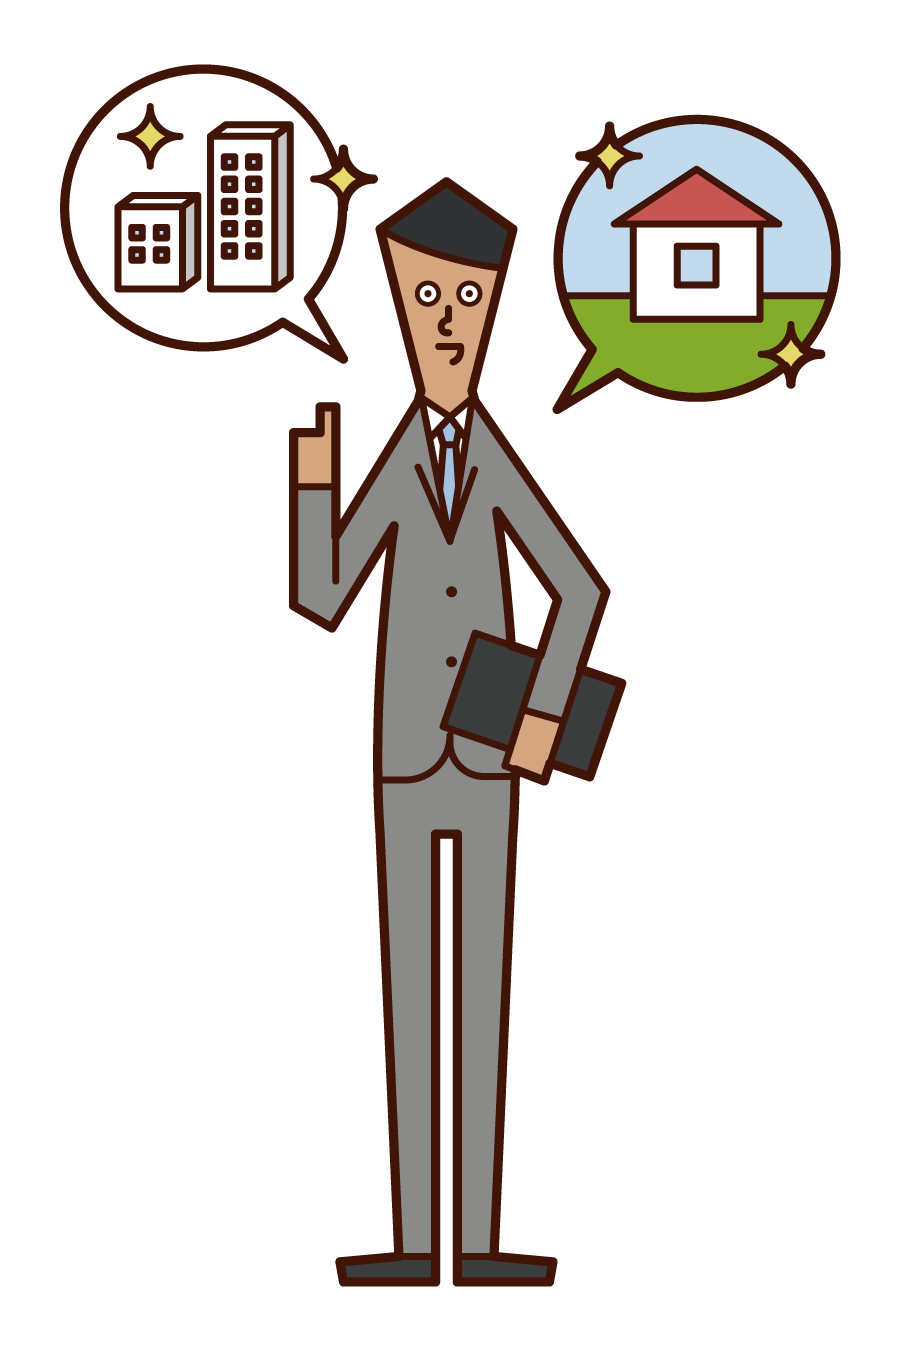 Illustration of a person (man) who is a building sales and real estate business